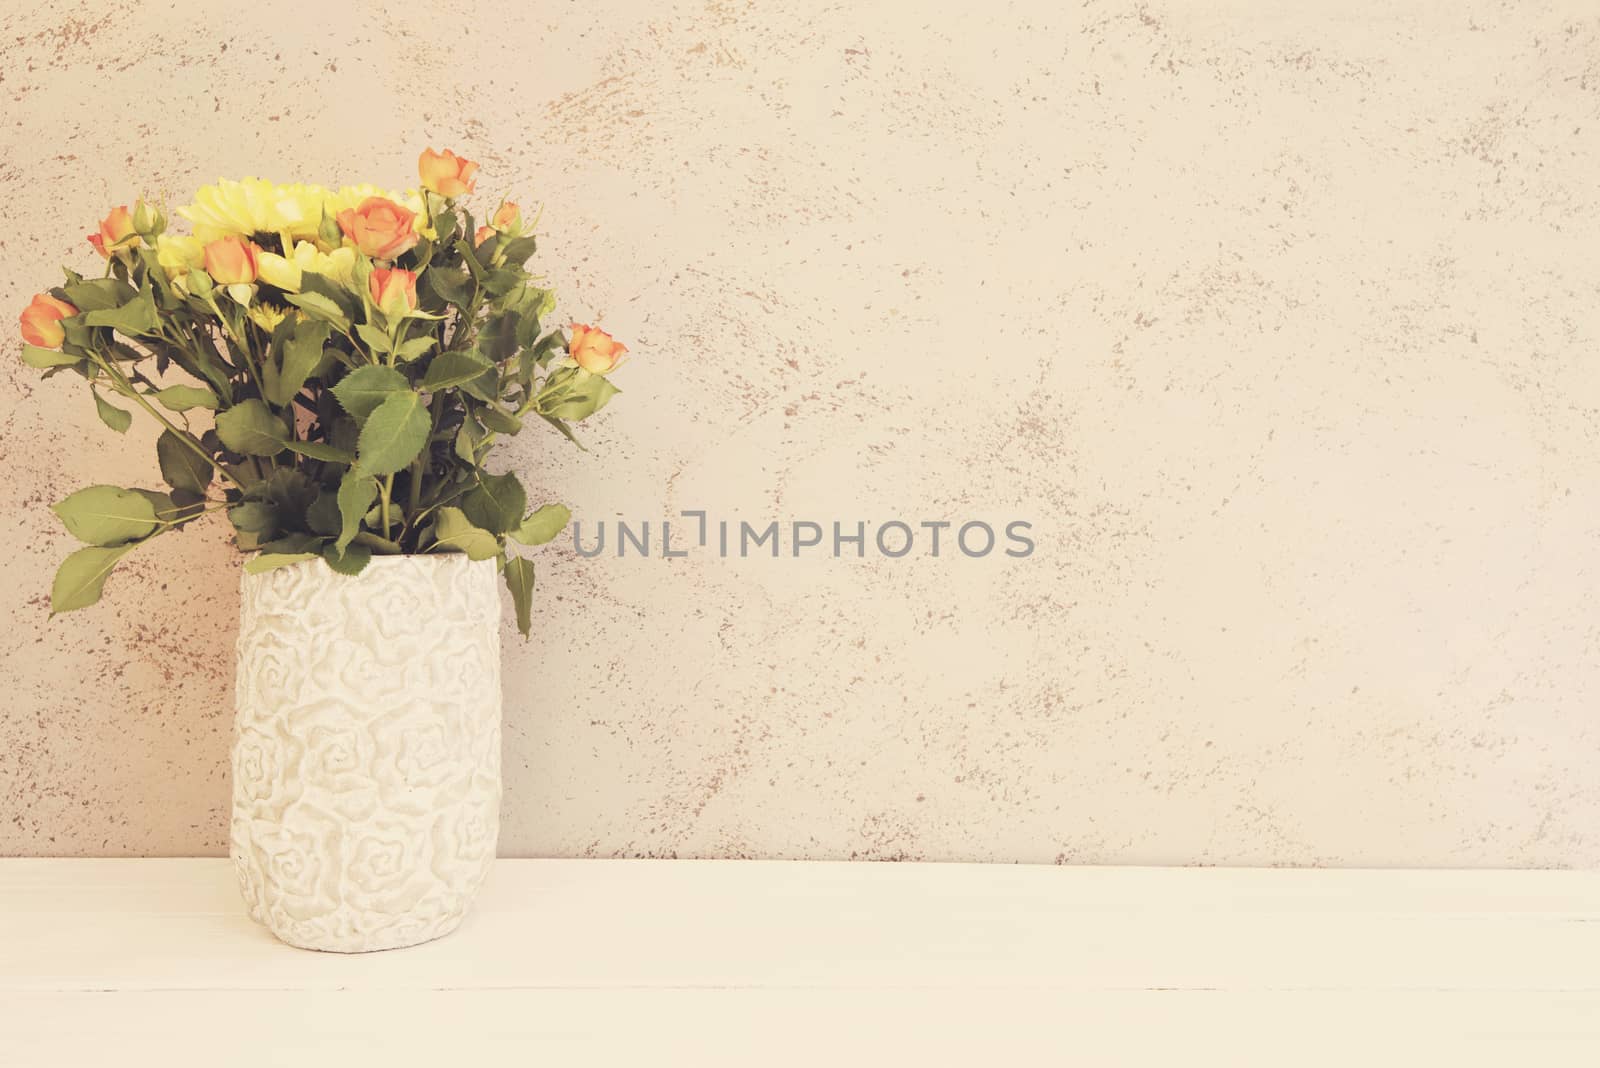 Vase of flowers. Rustic vase with orange roses and yellow chrysanthemums. White background, empty place, copy space. Vintage tinted